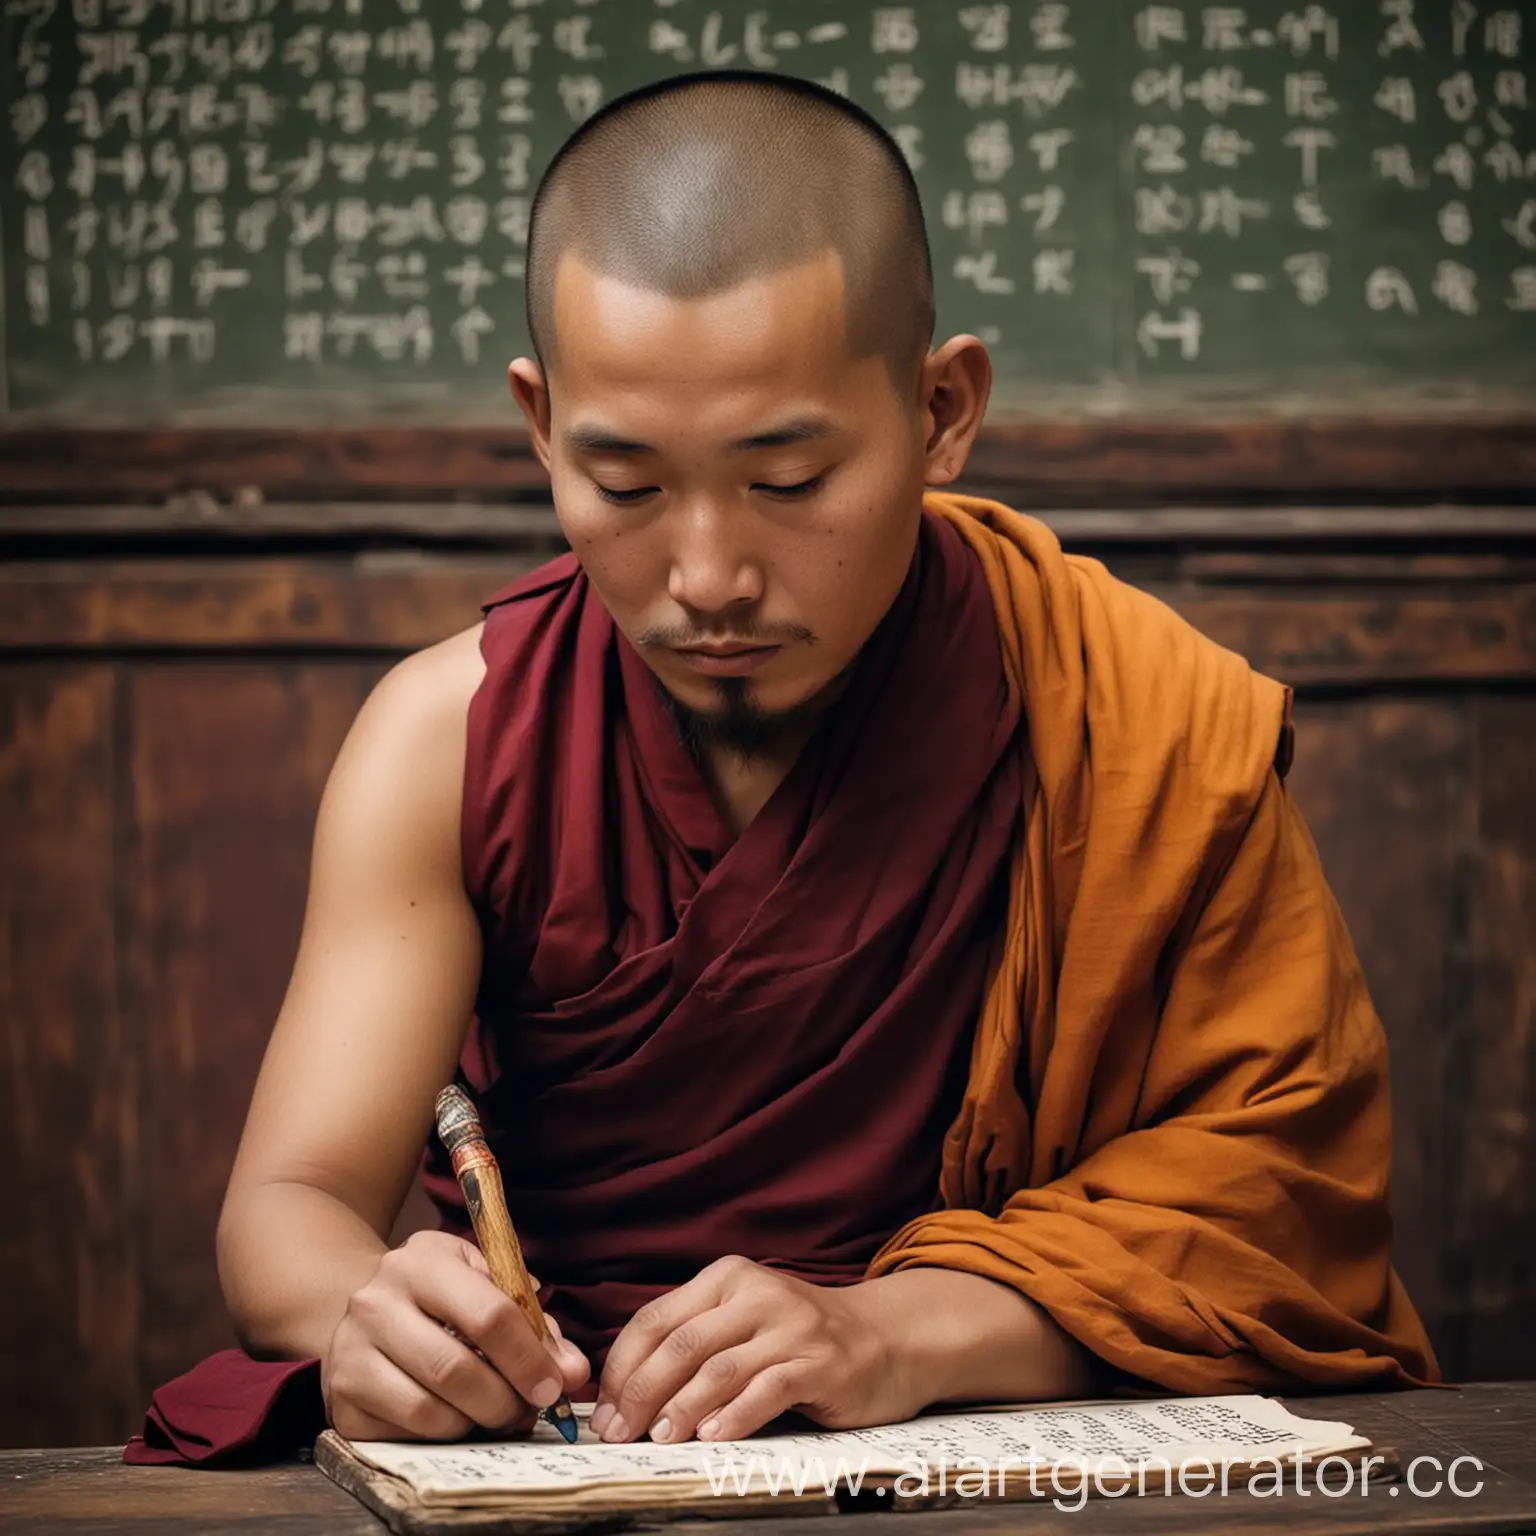 Tibetan-Monk-Solving-Mathematical-Task-on-Board-with-Counts